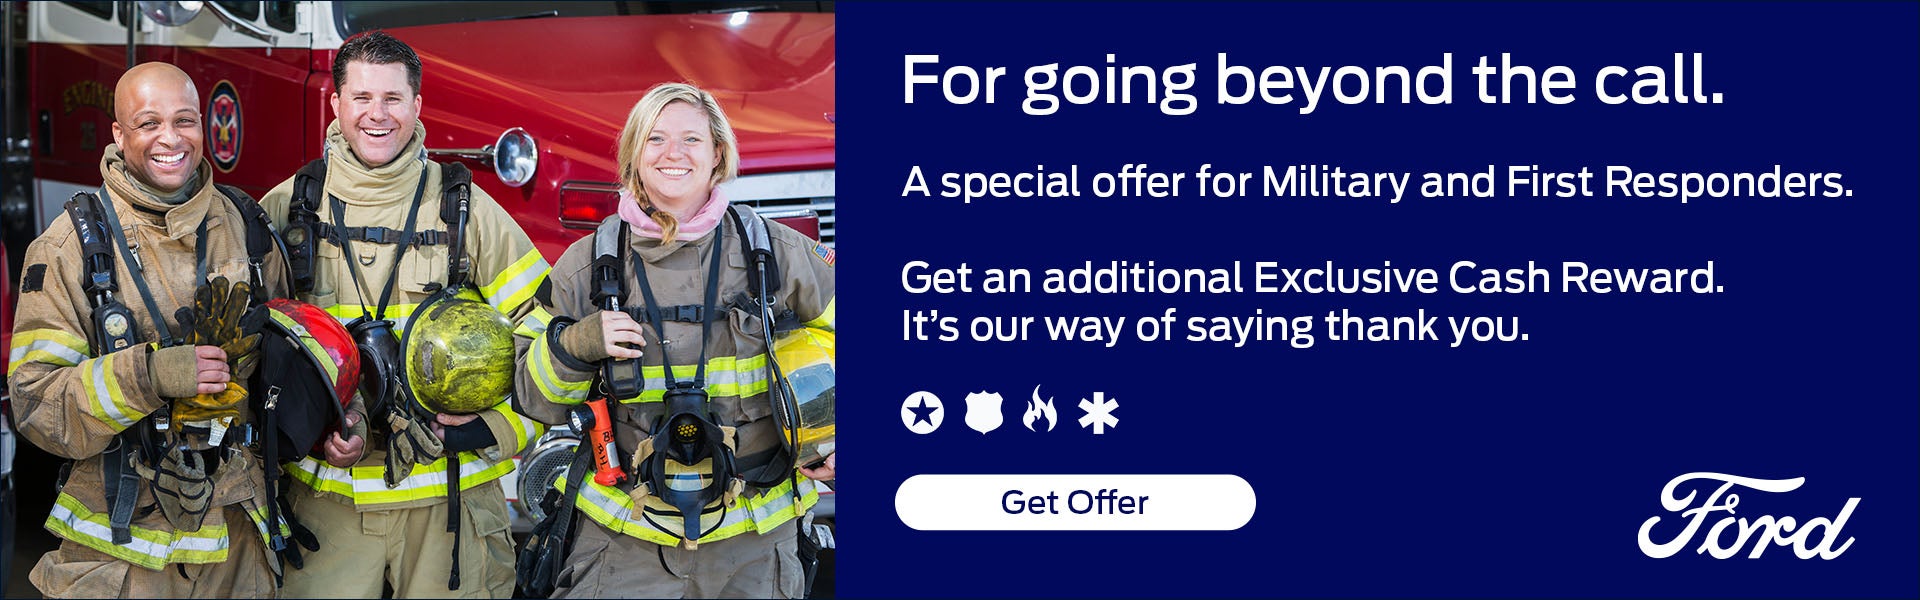 Special Offer for Military and First Responders